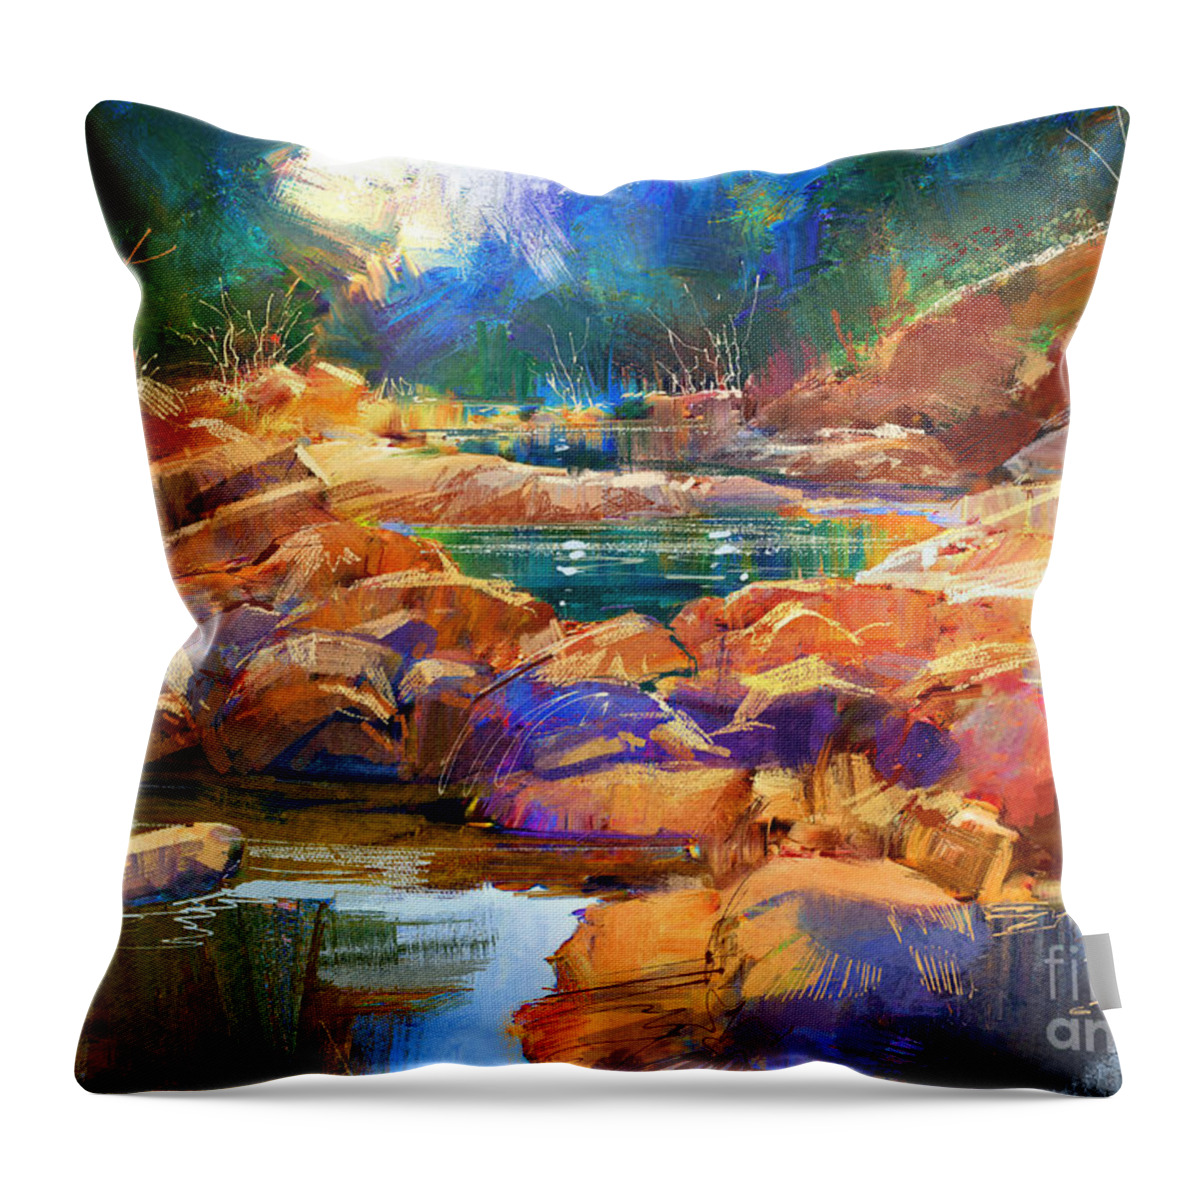 Abstract Throw Pillow featuring the painting Enchanted Creek by Tithi Luadthong